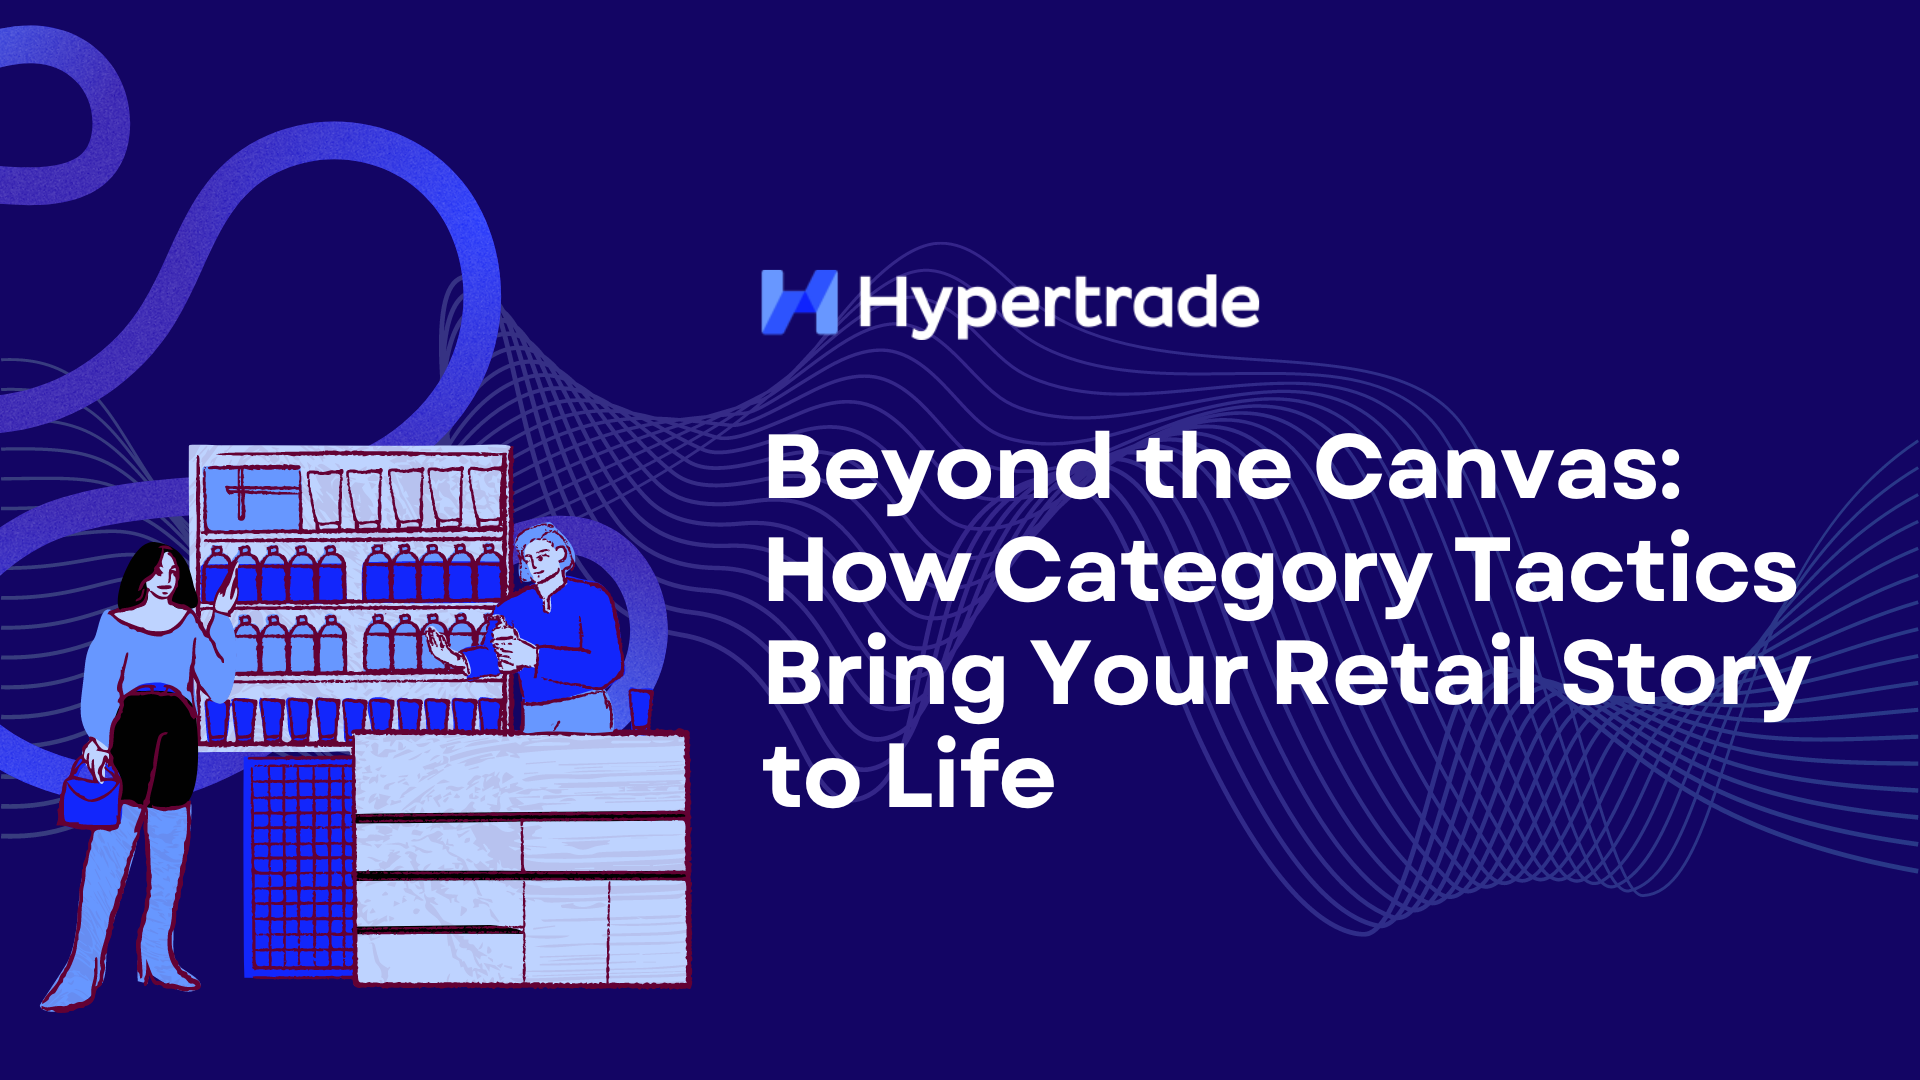 Beyond the Canvas: How Category Tactics Bring Your Retail Story to Life